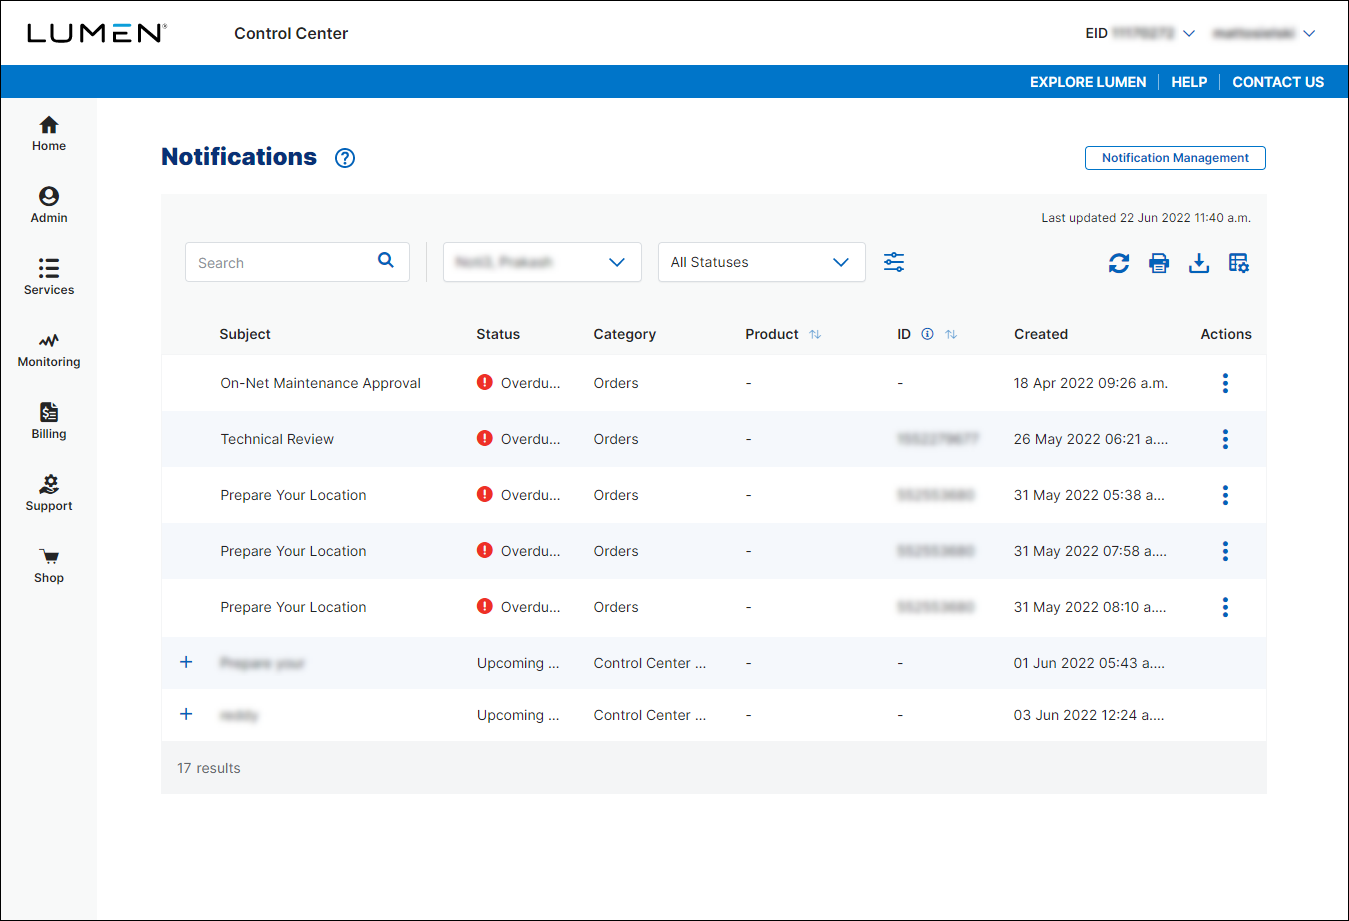 Notifications (system administrator view)